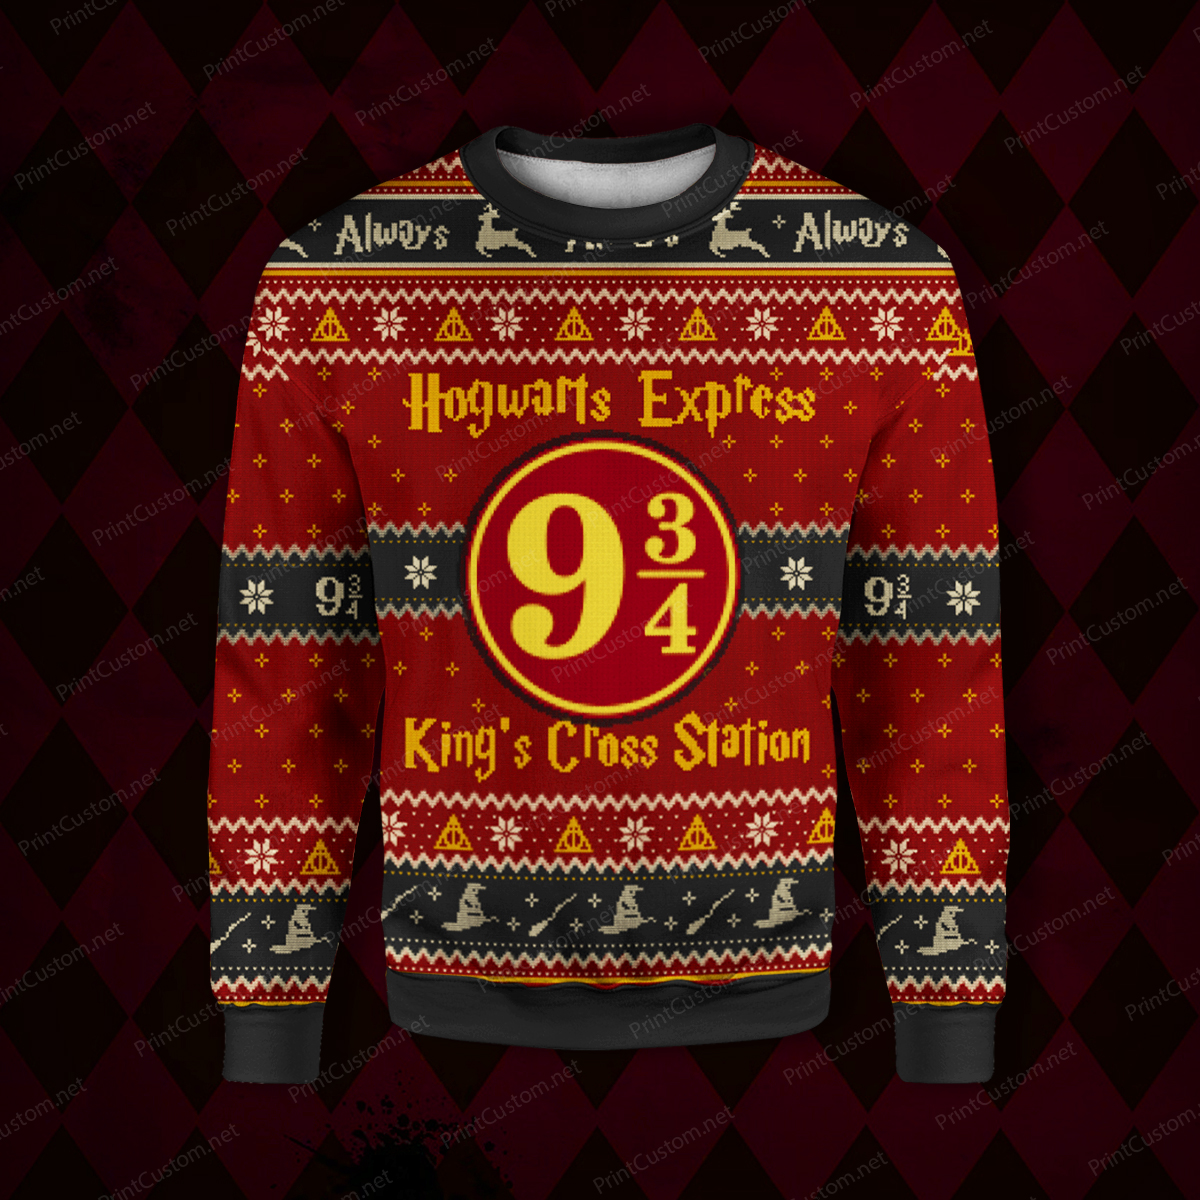 King's cross station harry potter full printing ugly christmas sweater 3